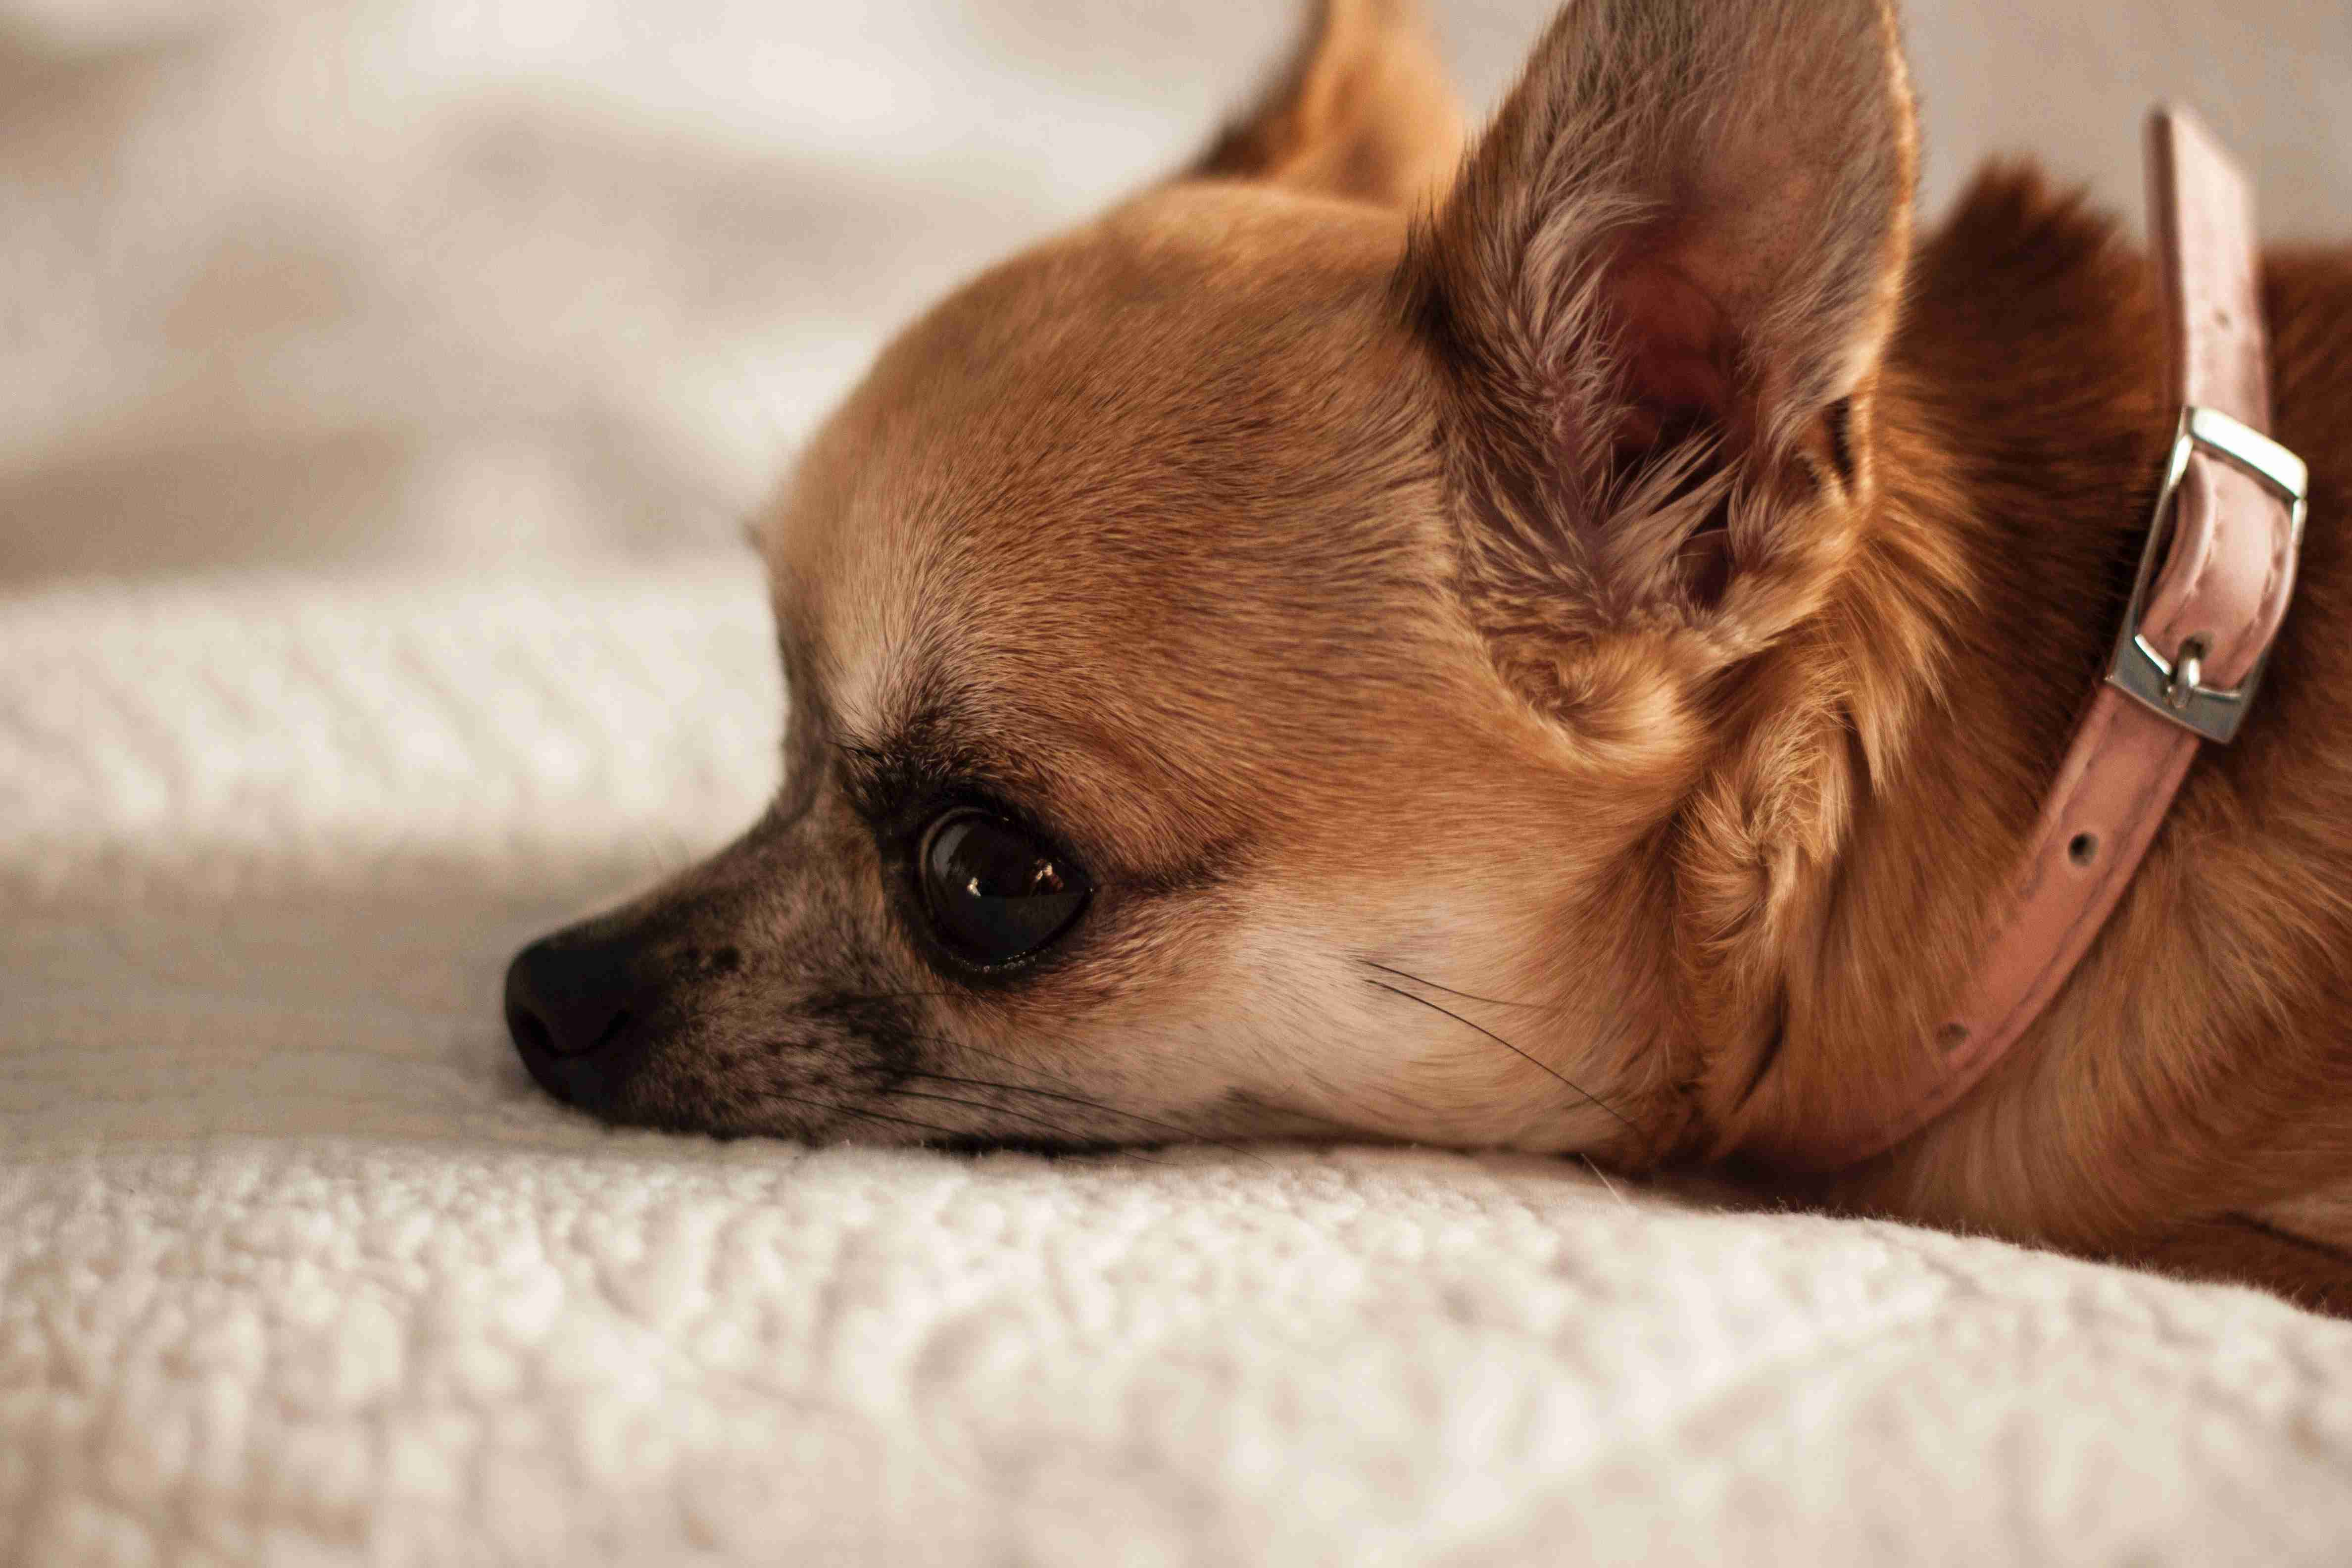 How can you create a safe and comfortable environment for a Chihuahua with anger issues?